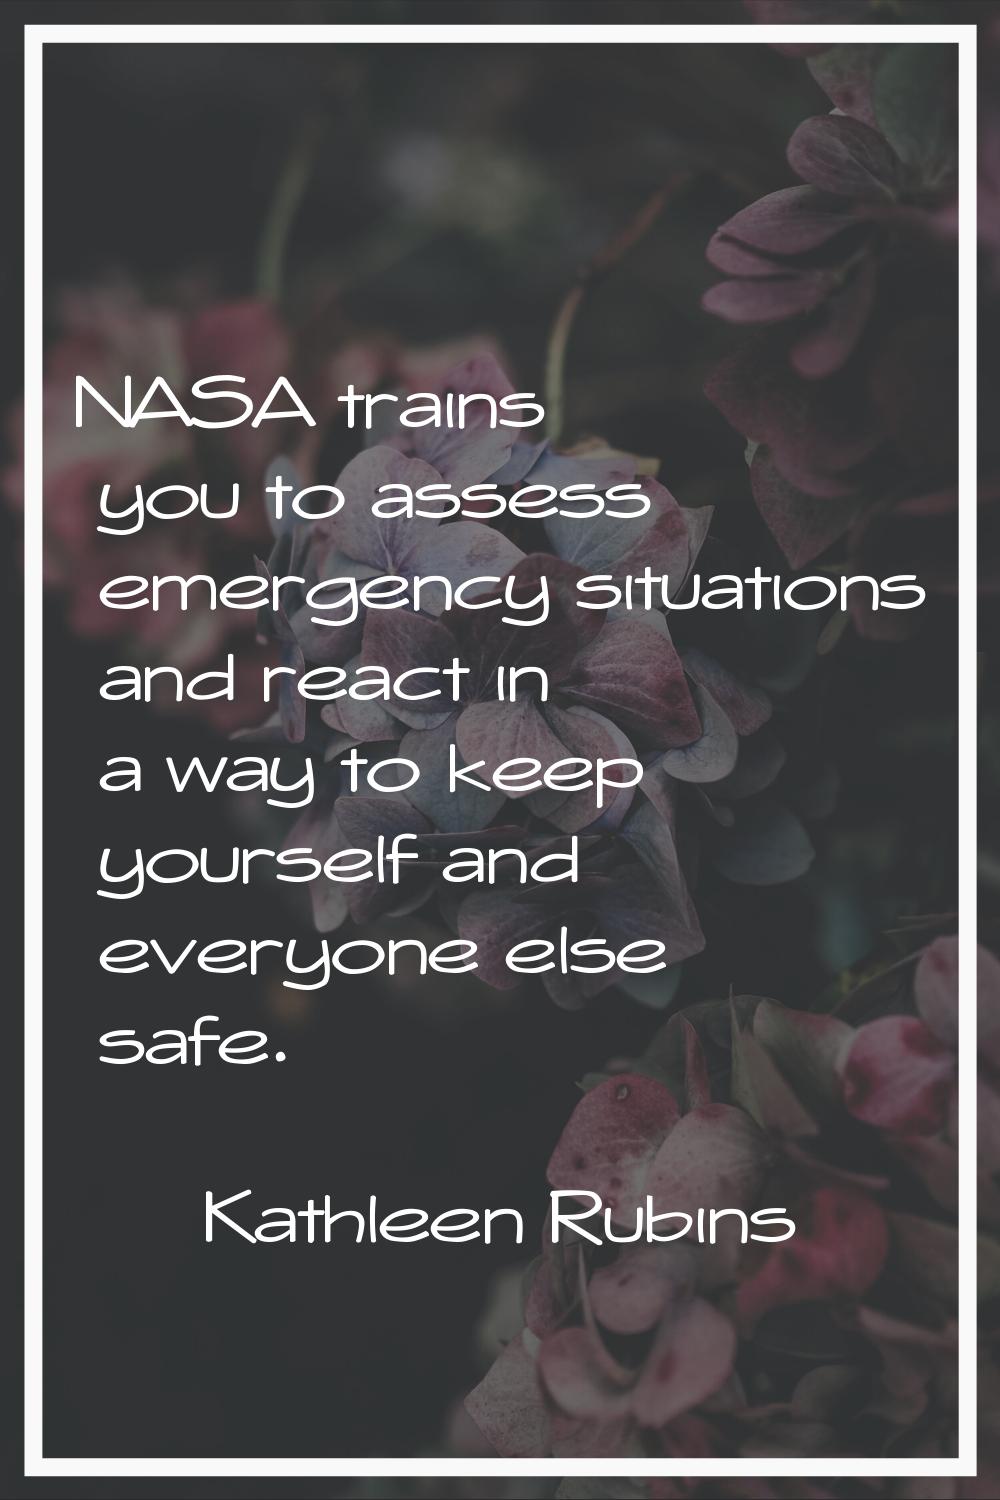 NASA trains you to assess emergency situations and react in a way to keep yourself and everyone els